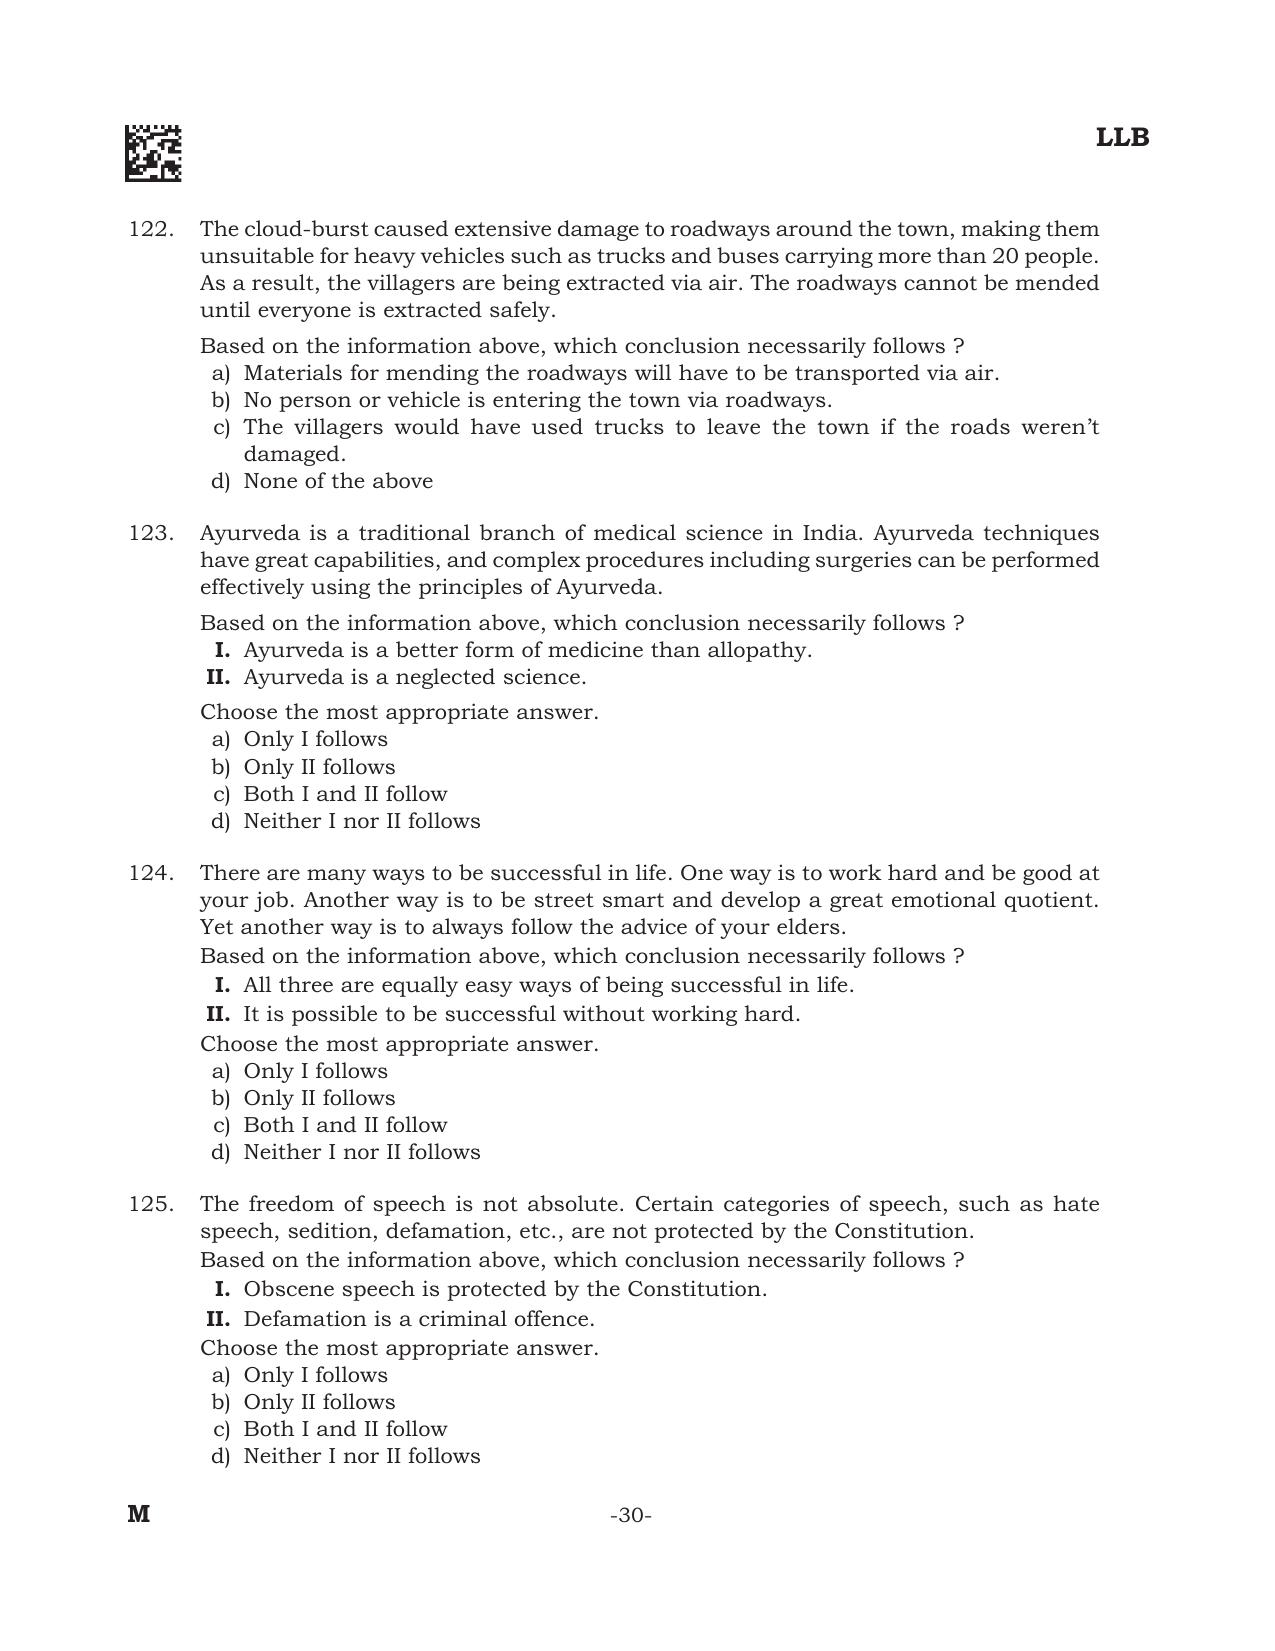 AILET 2022 Question Paper for BA LLB - Page 30